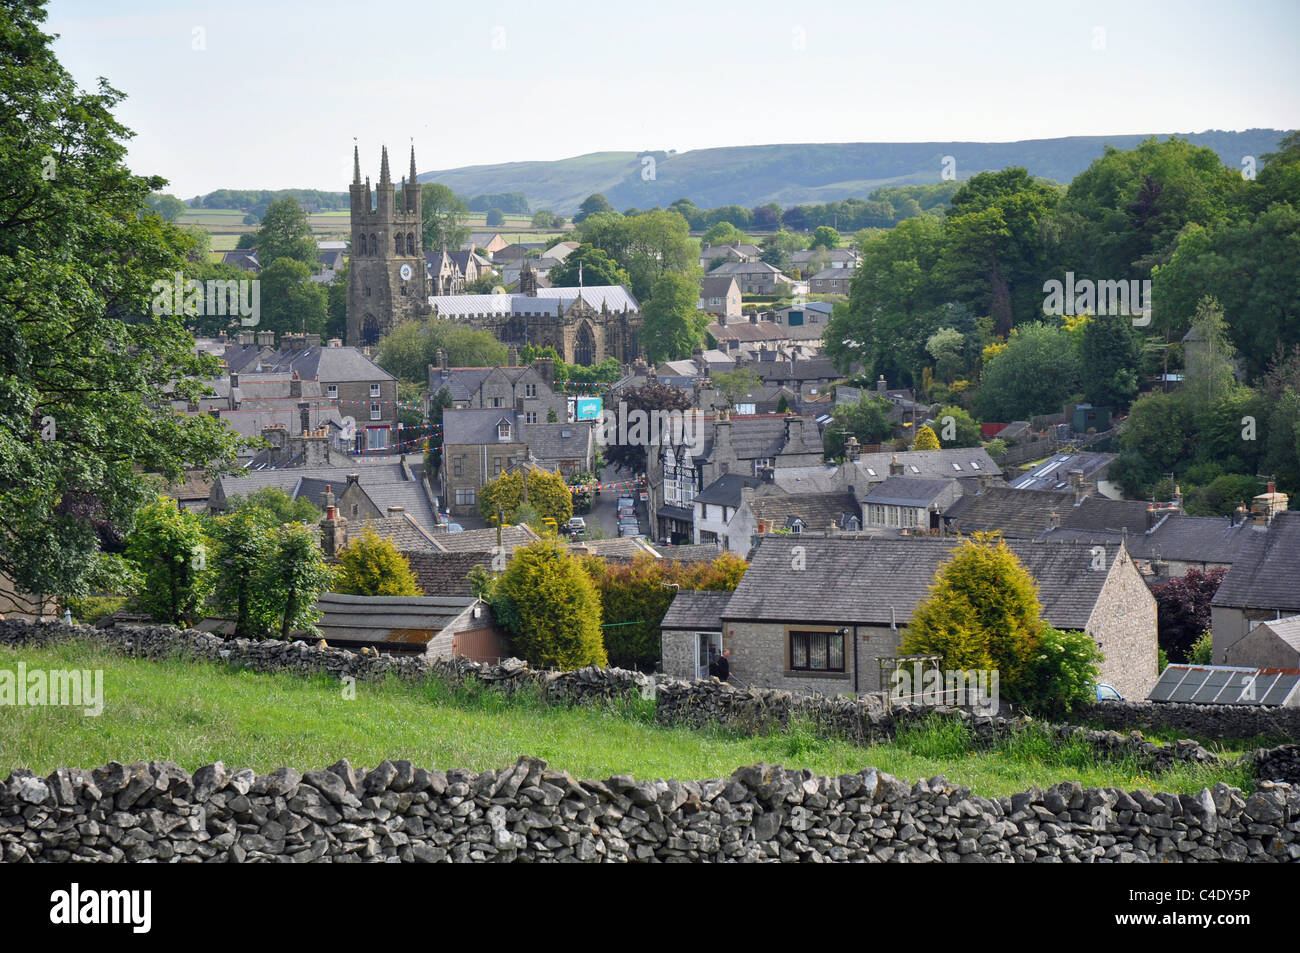 Tideswell, Derybshire, England: view of Tideswell Stock Photo